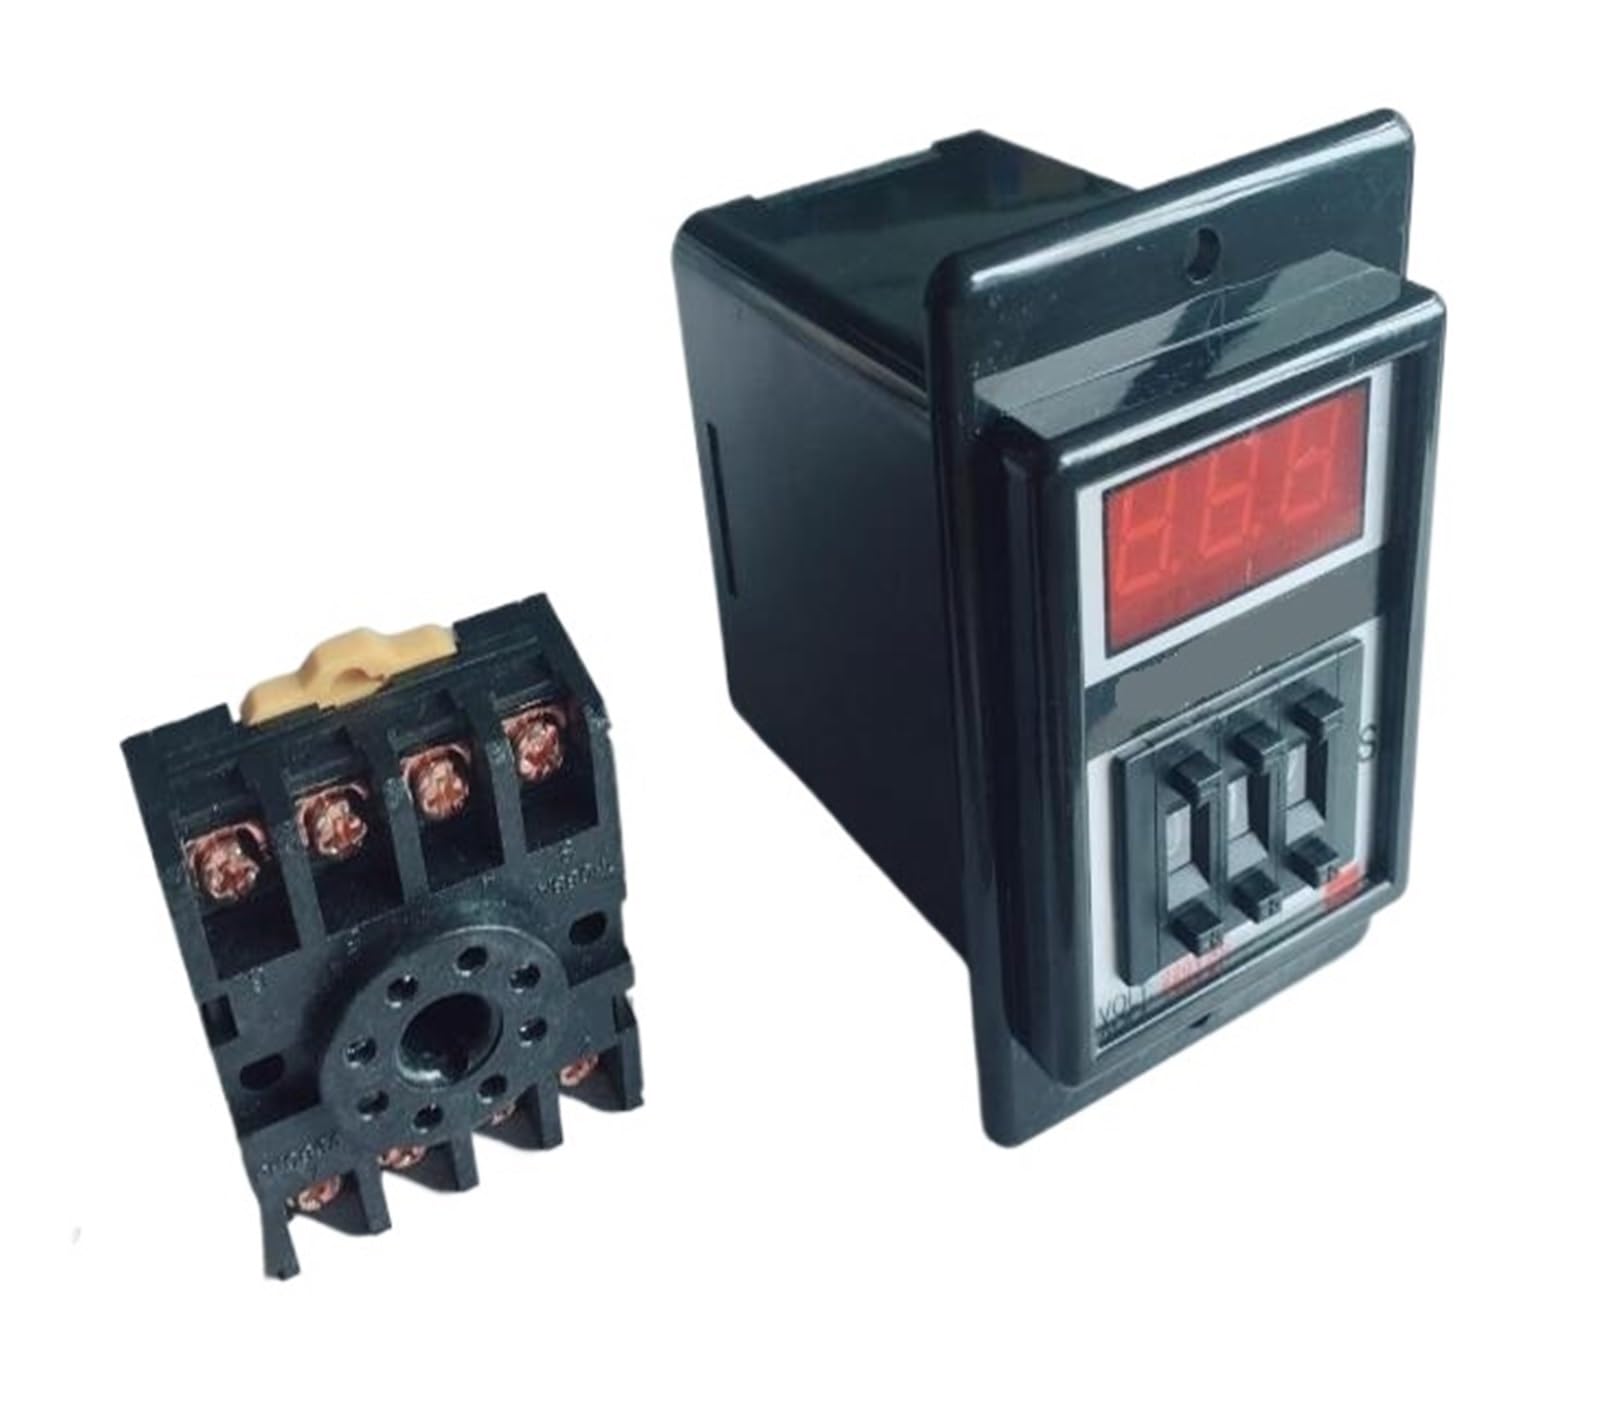 1-999S 1-99.9S 1-999M digits programmable timer delay relay ASY-3D Delay Timer Time Relay 8PIN with base ZDVHOMCB(ASY-3D 999S,AC220V) von ZDVHOMCB